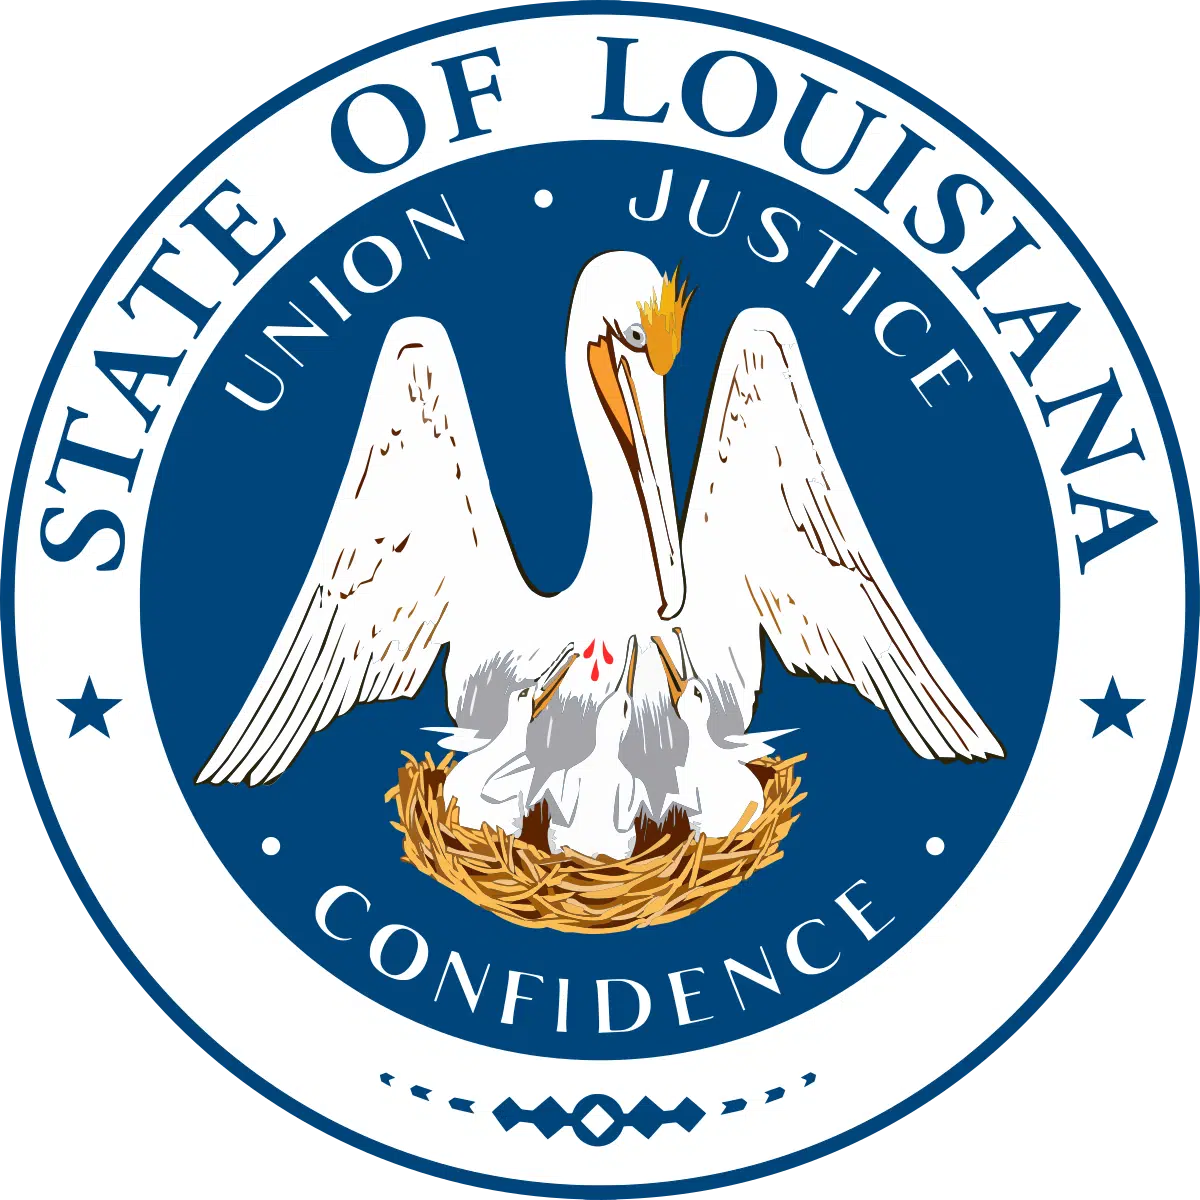 Elimination of Required Breaks for working Louisiana Teens close to being passed